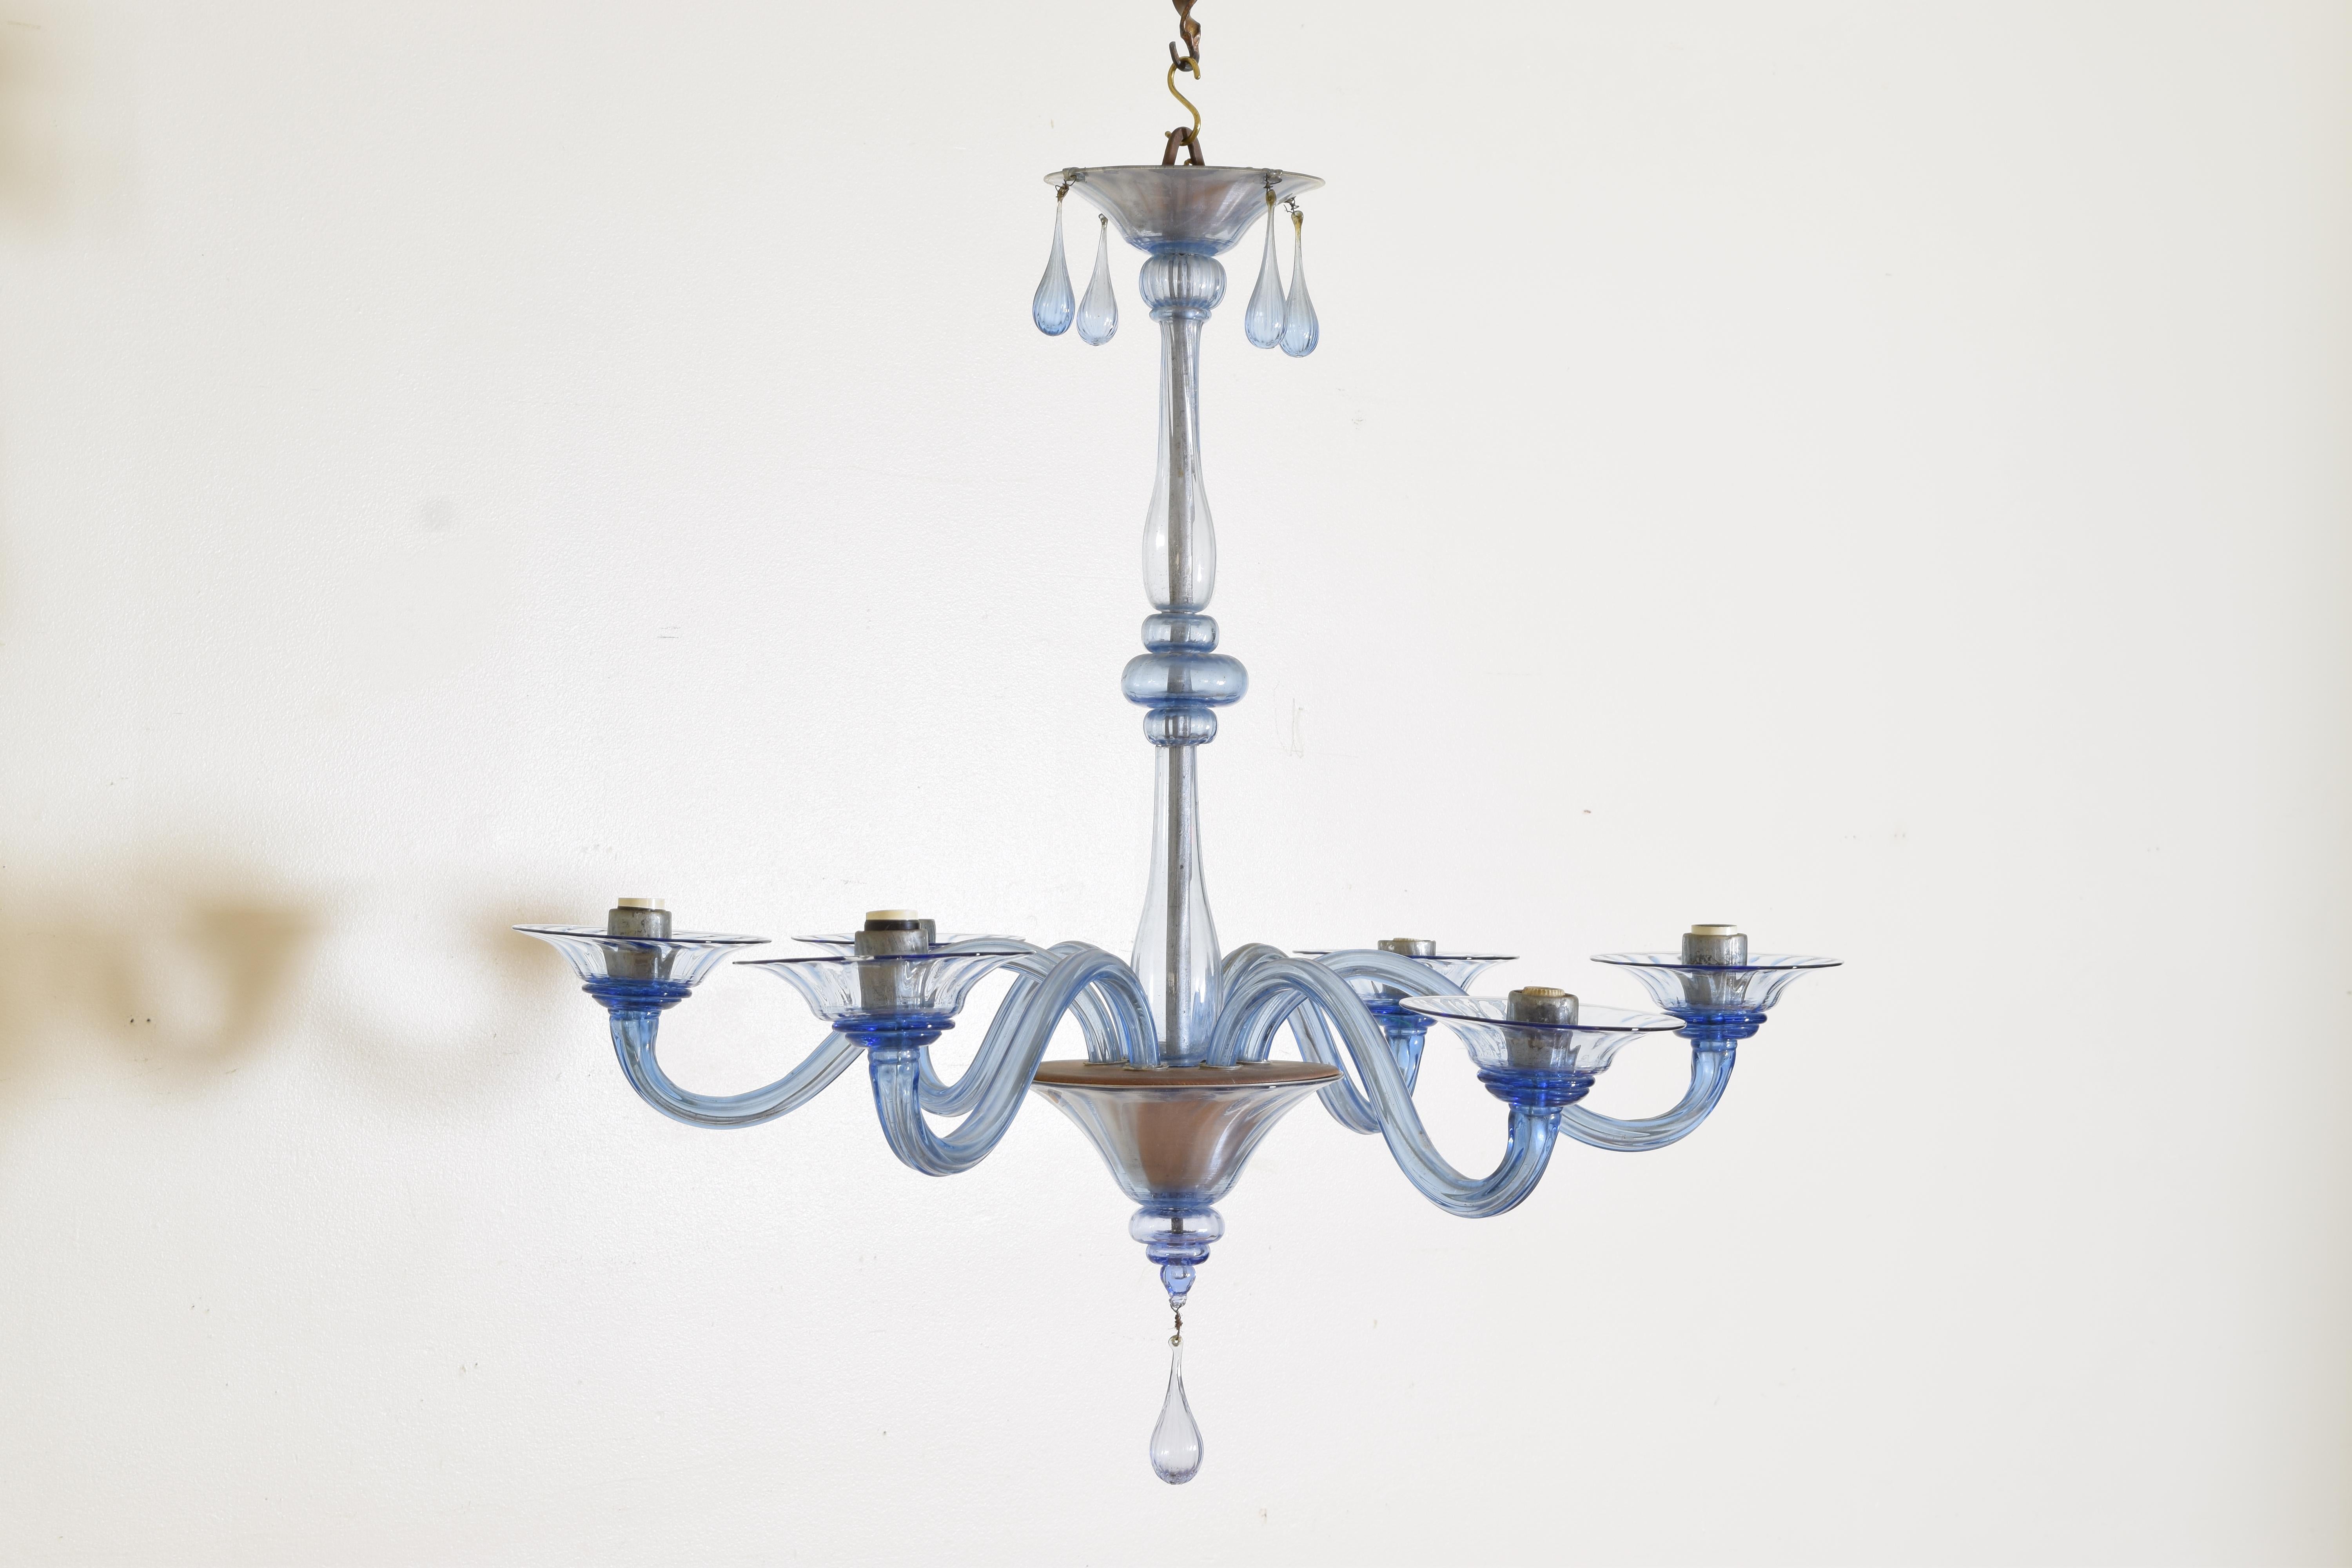 Constructed of multiple blown glass pieces the canopy section with four glass tassels atop a standard of straight glass rods and balls, the lower section issuing six arms and having a tassel terminal